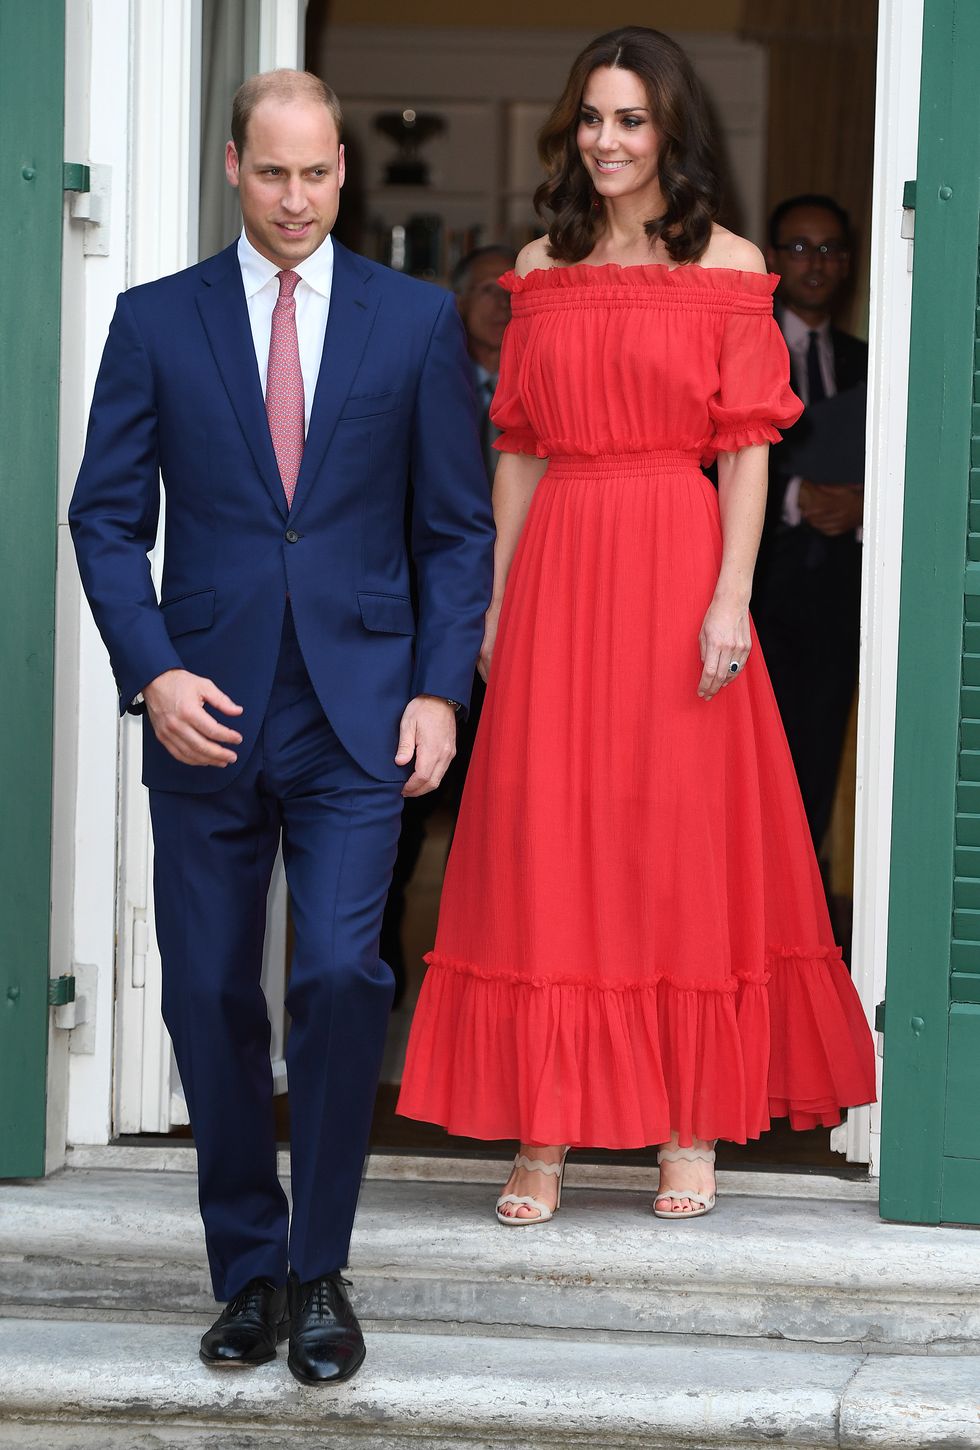 Kate Middleton and Prince William at The Queen's Birthday Party at the British Ambassadorial Residenceduring